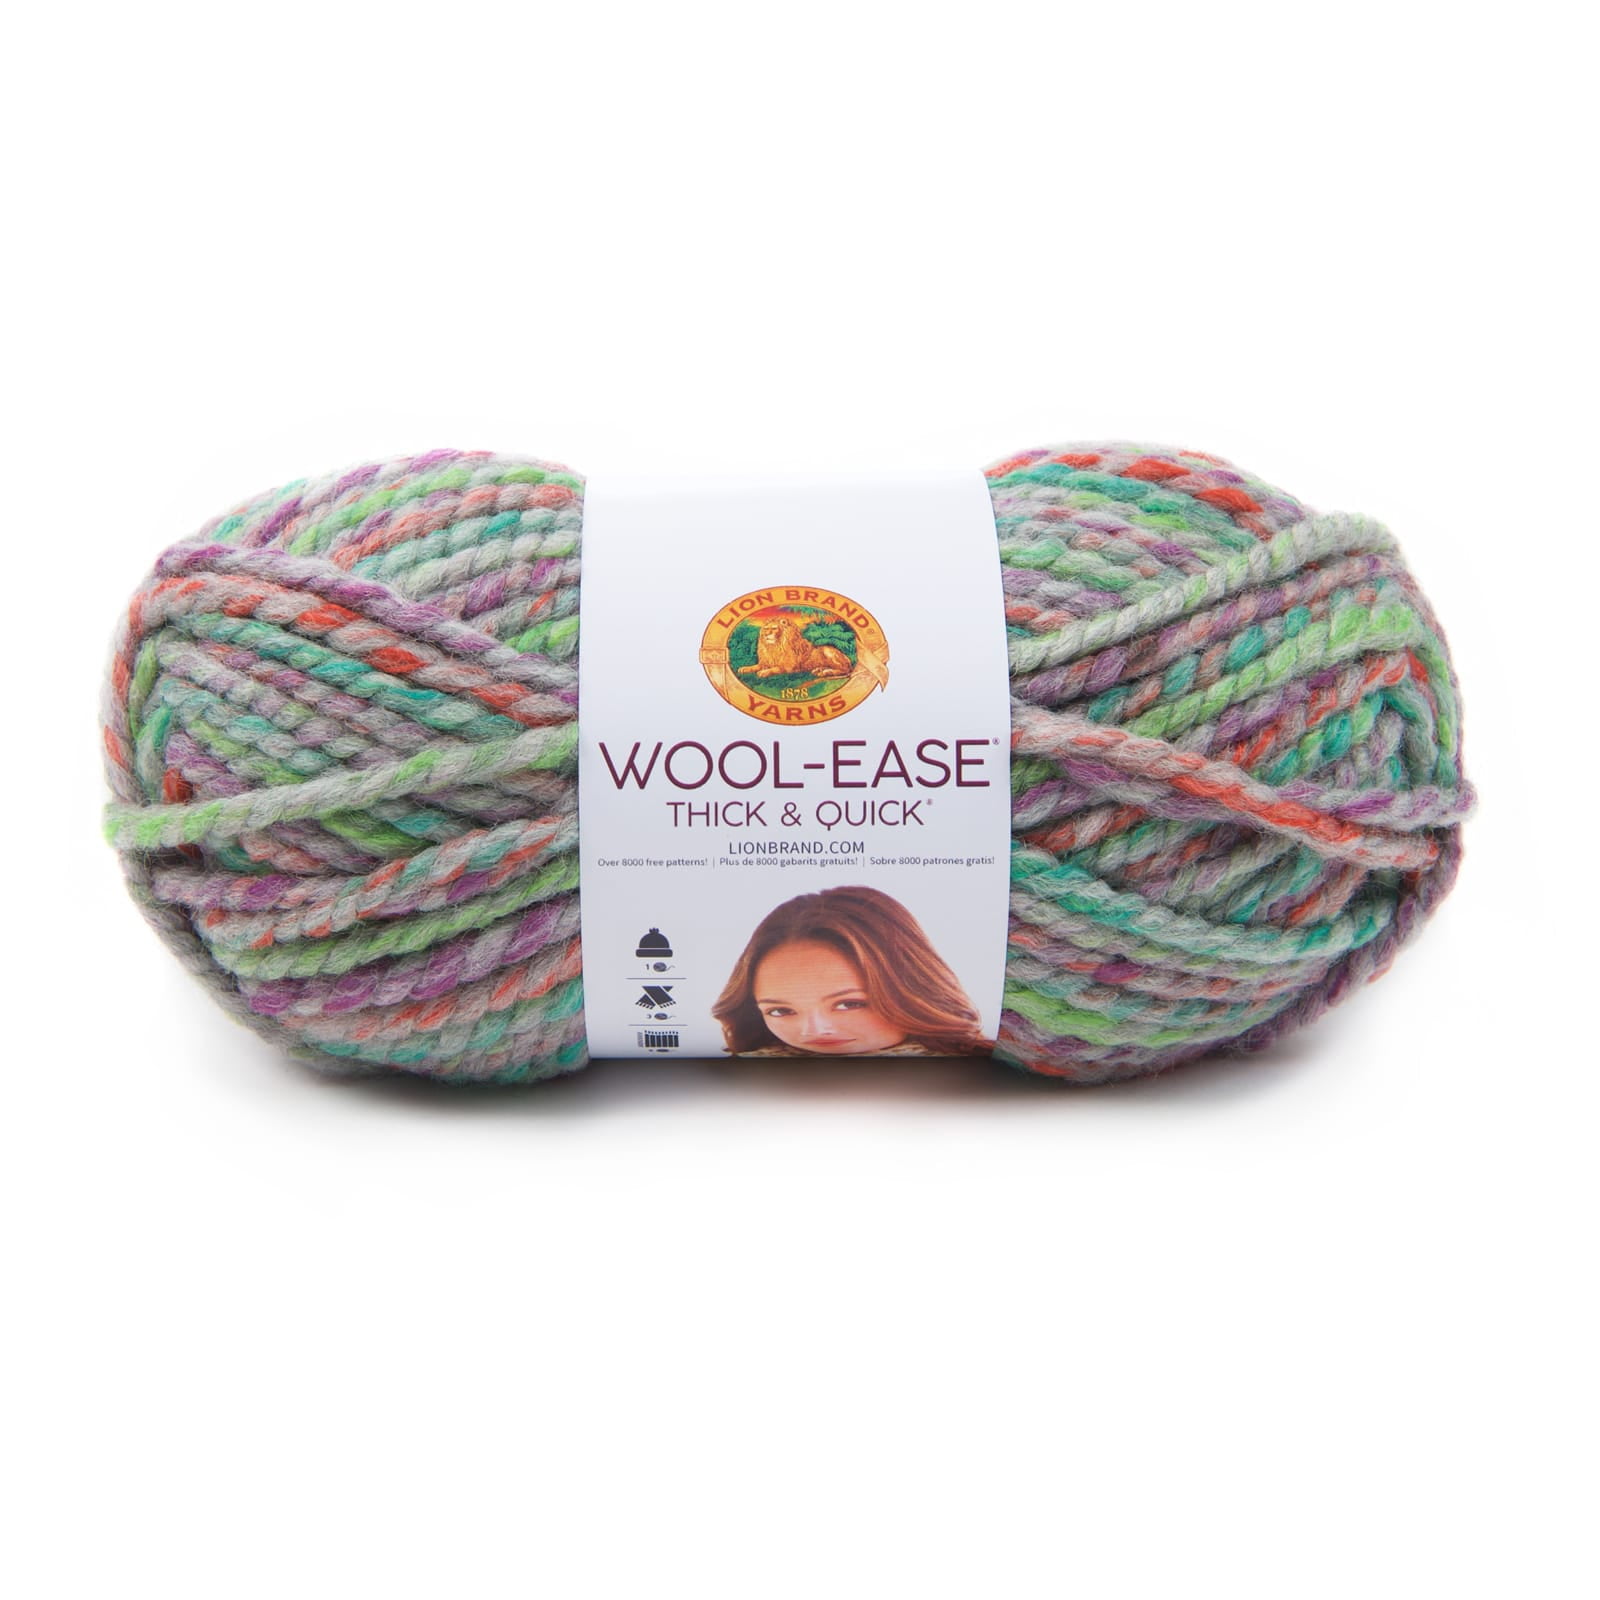 Lion Brand Wool-Ease Thick & Quick Yarn-Fern, 1 count - Gerbes